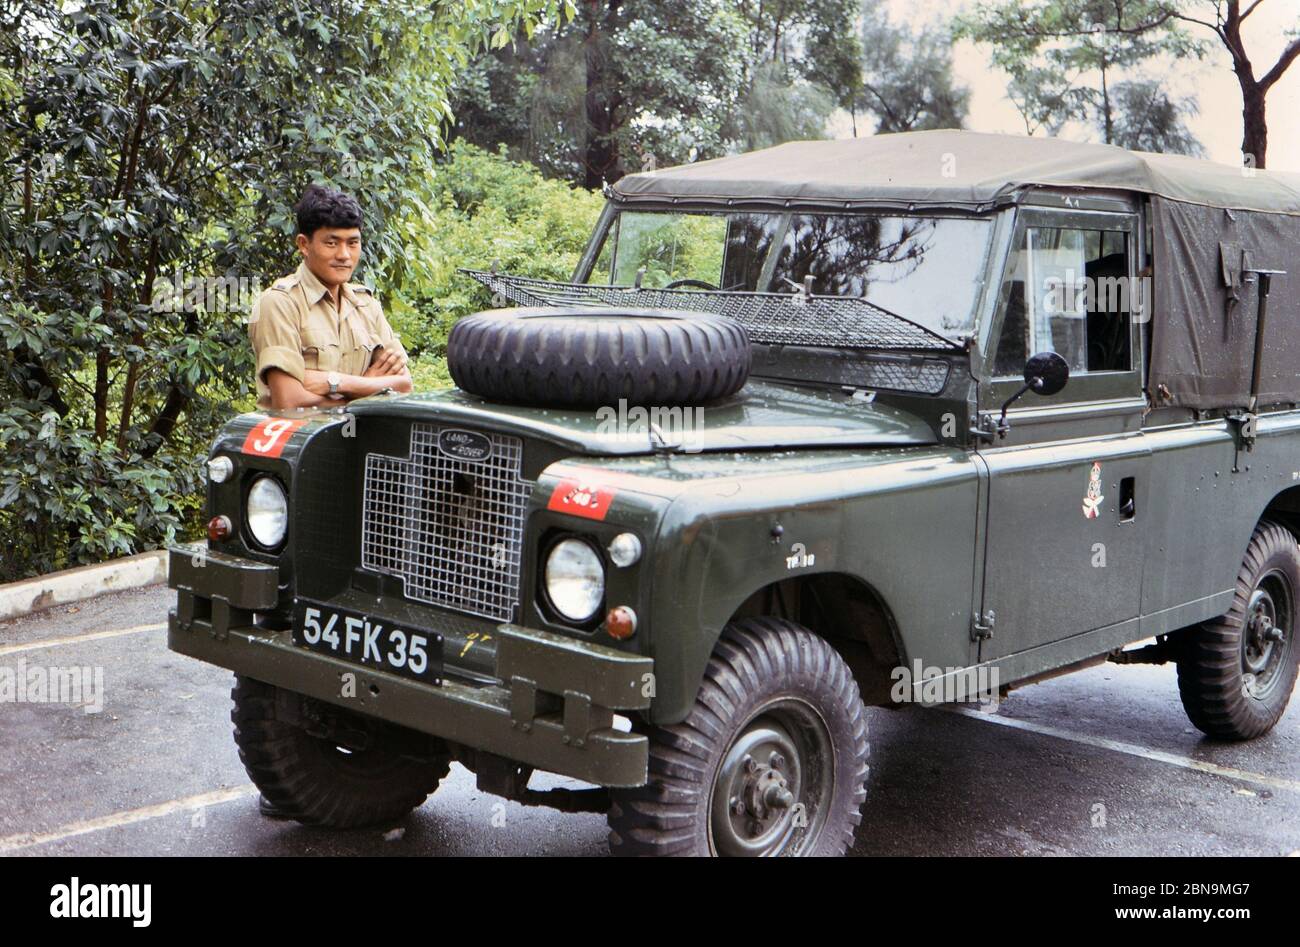 1973 - Gurkha Soldier and jeep near in Hong Kong ca. early 1970s Stock Photo